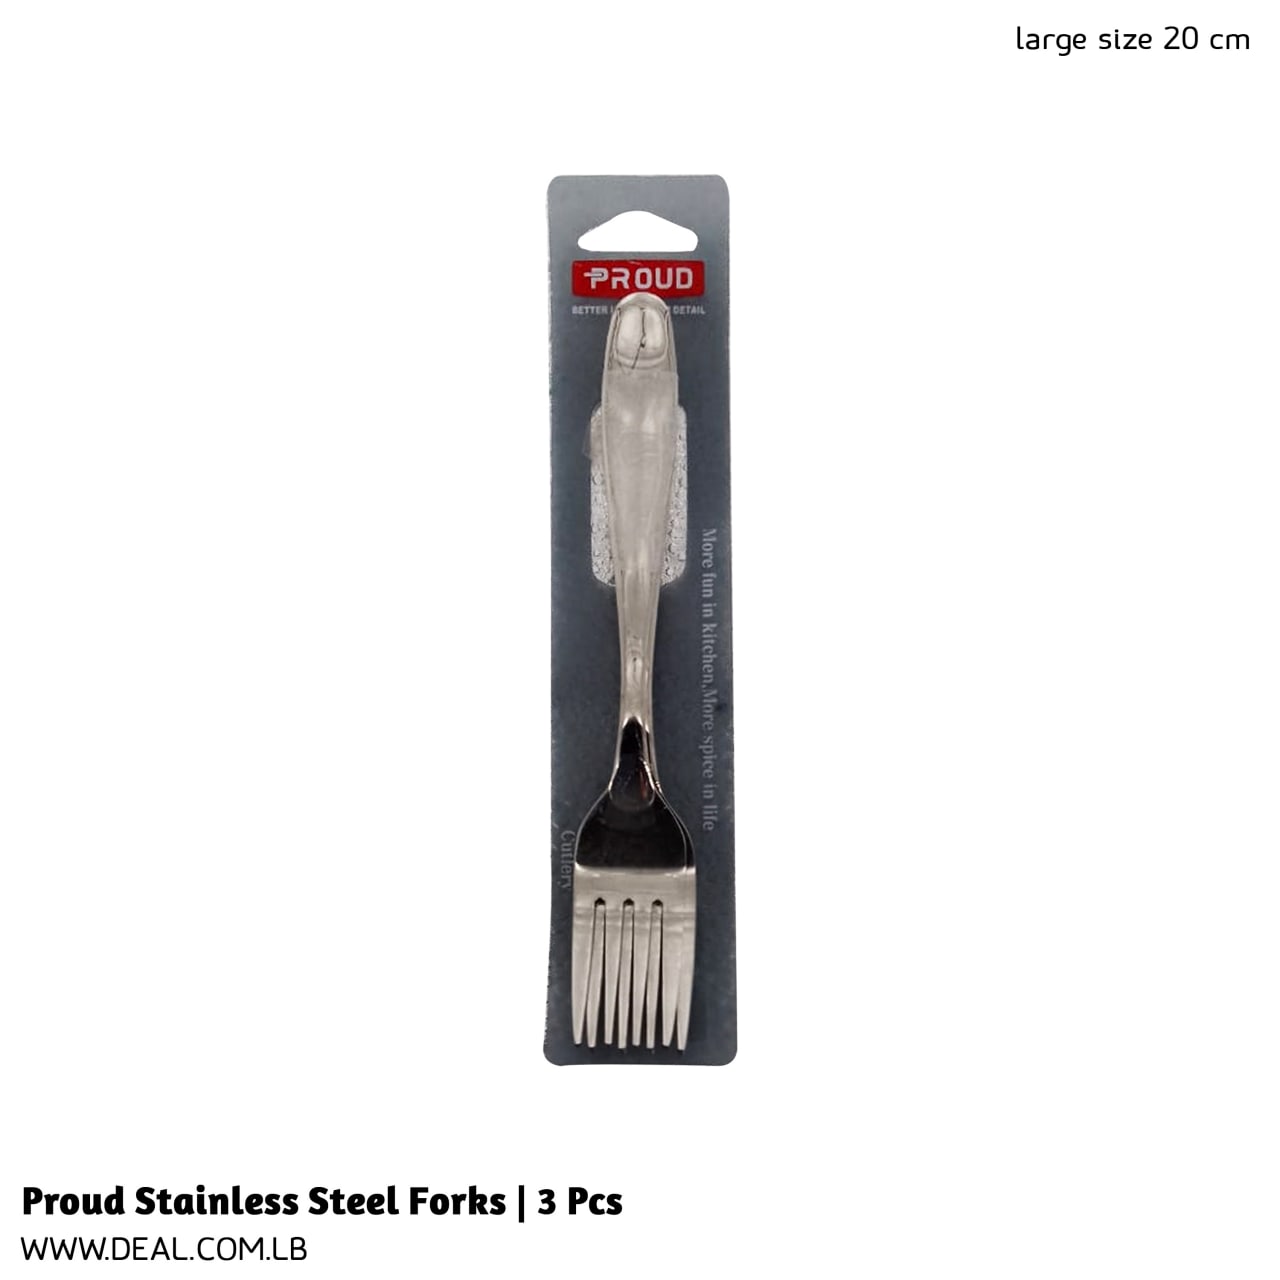 Proud Stainless Steel Forks | 3 Pcs